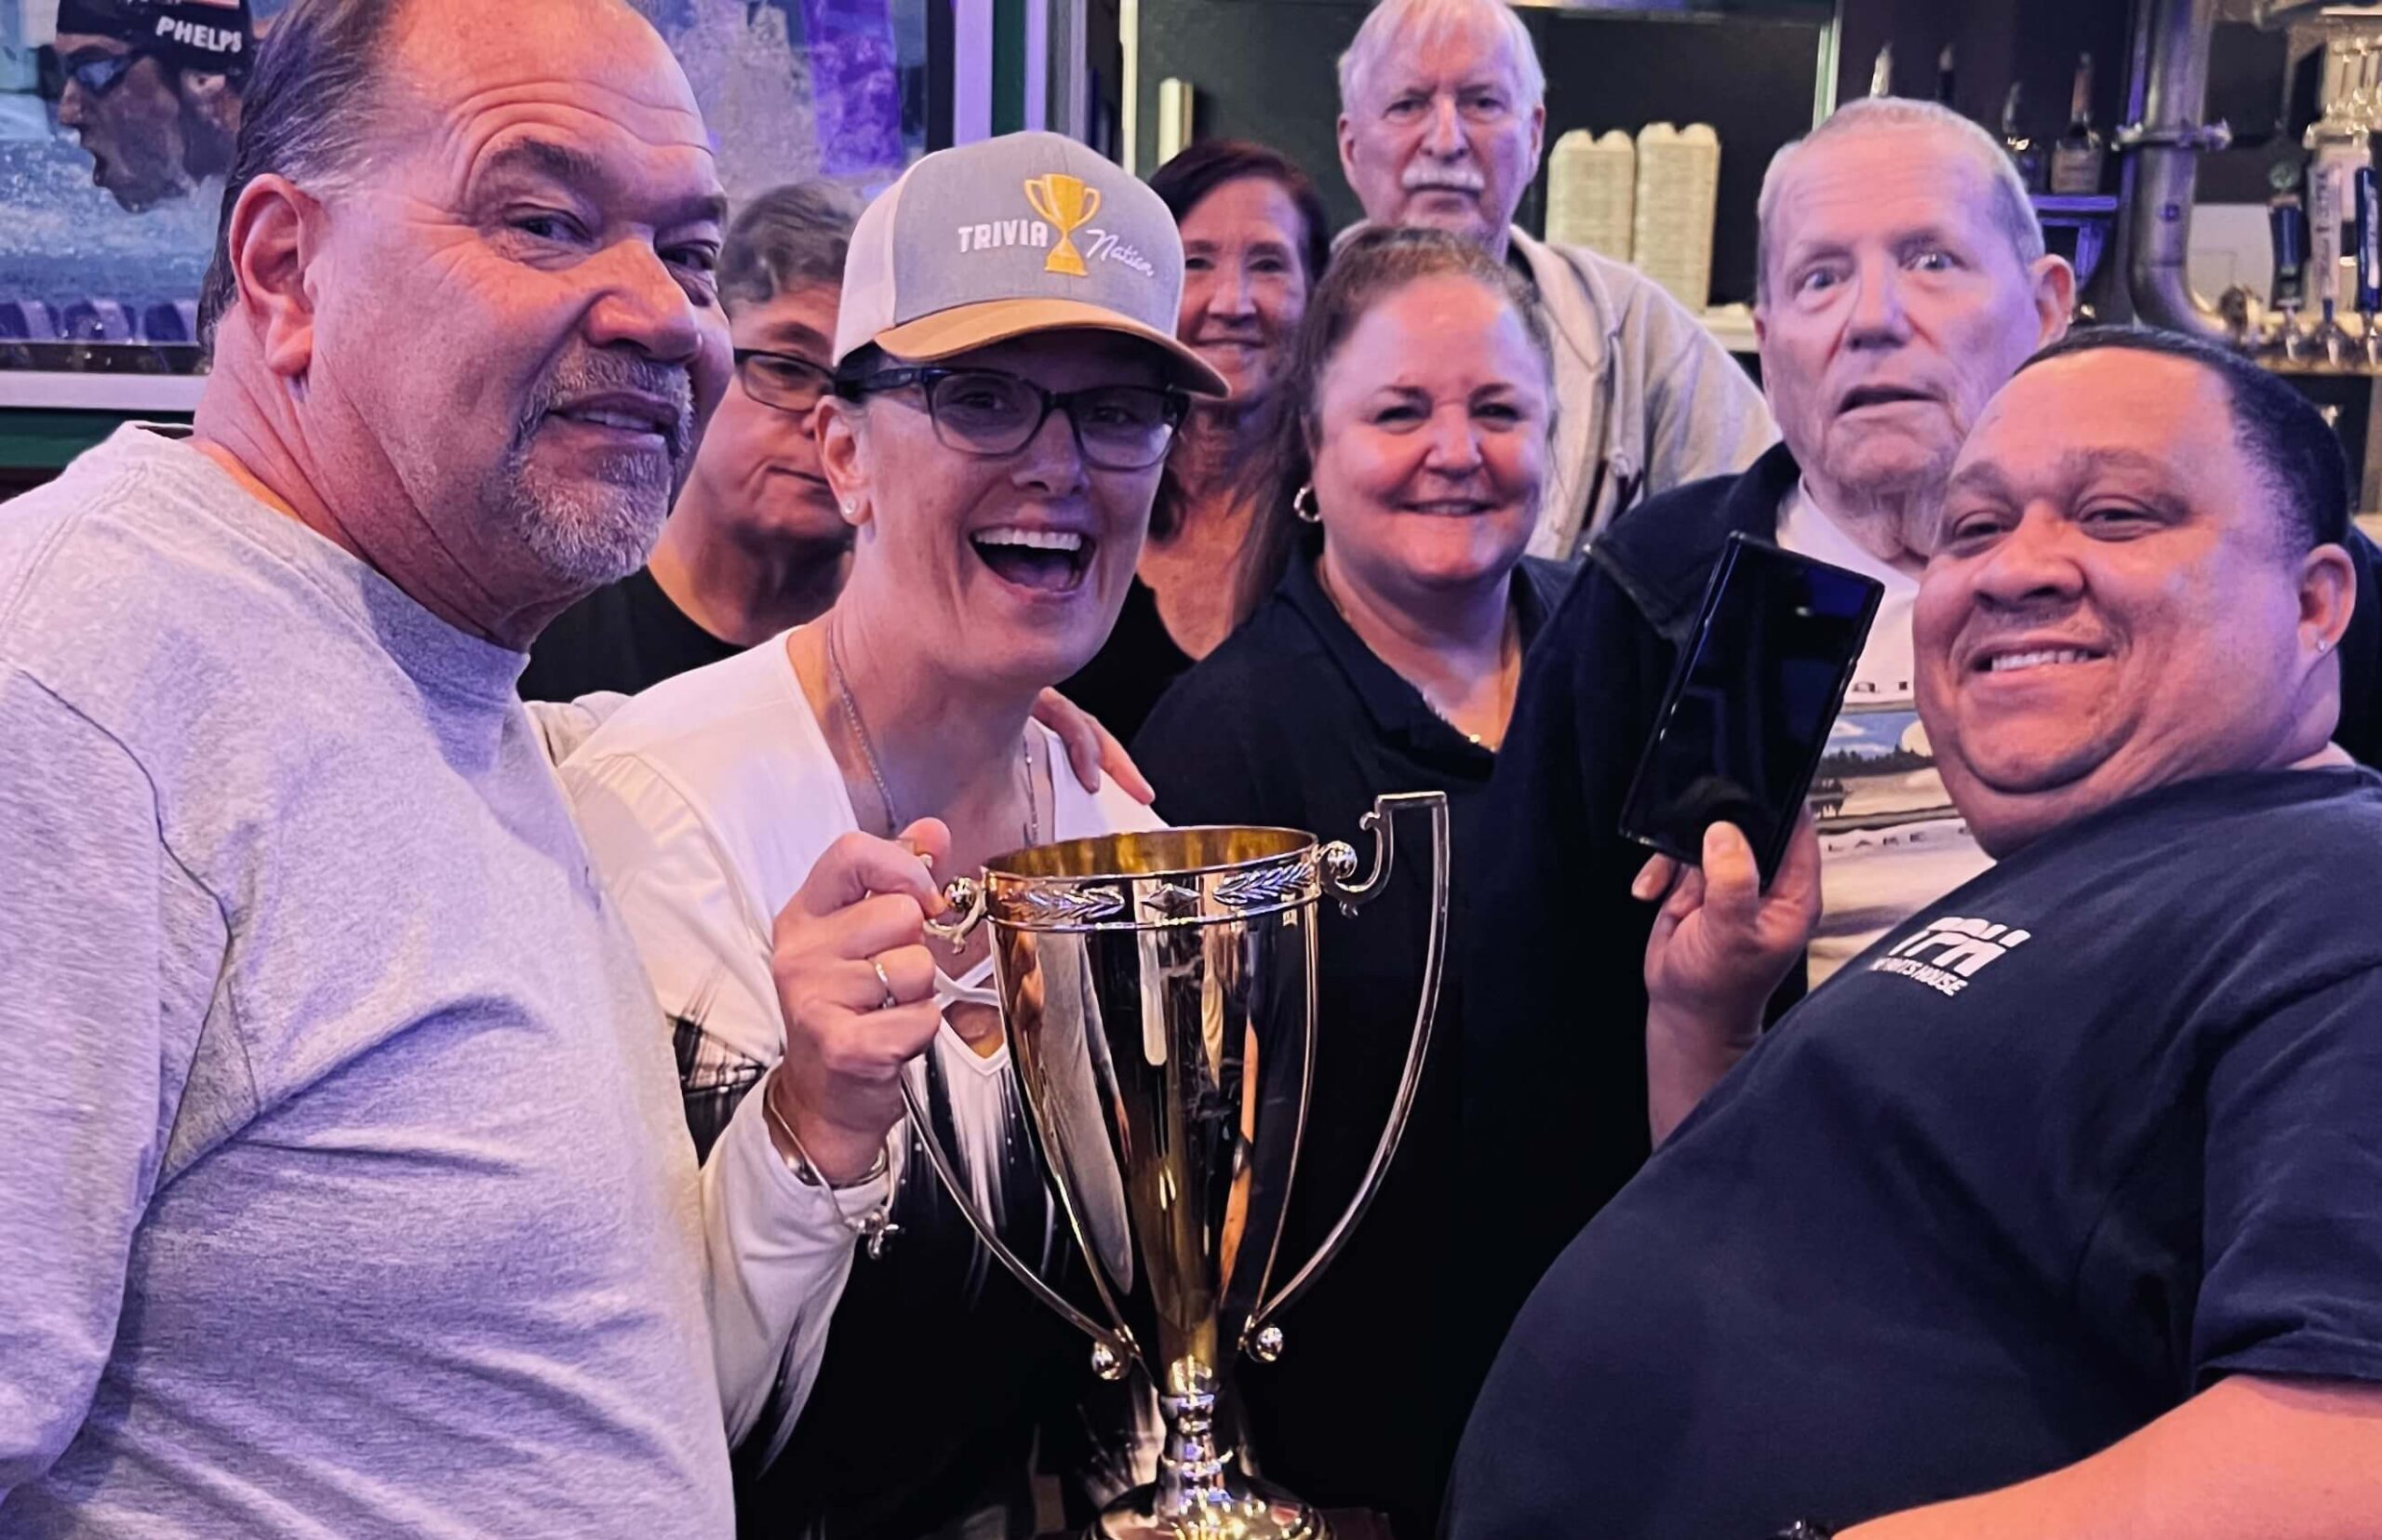 Duffy's Sports Grill Port St. Lucie FL 34593 trivia night: close-up of a group of adults smiling and having fun while the woman in the center wears a Trivia Nation hat and holds up a Trivia Nation trophy